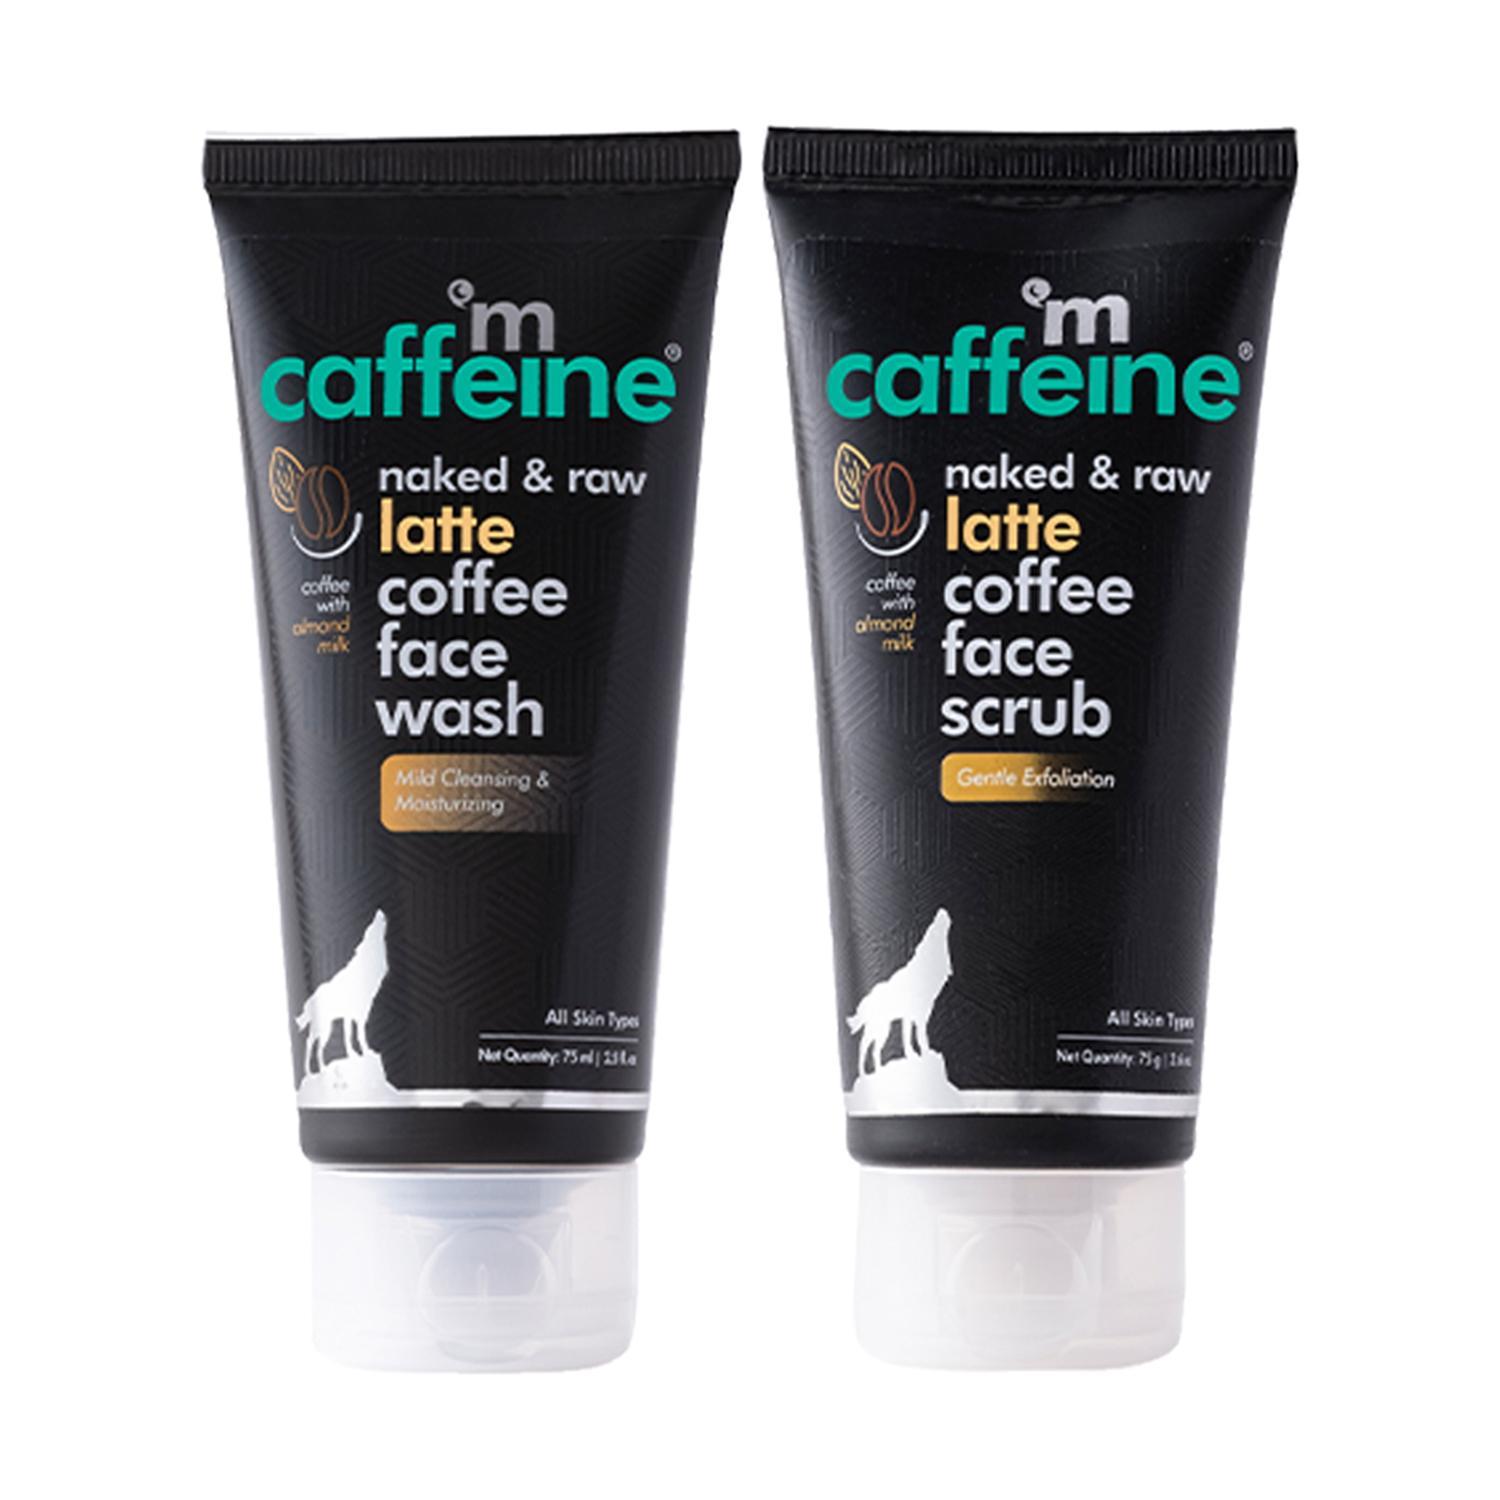 mcaffeine coffee face wash & scrub combo reduces acne pimple & tan gives glowing skin pack of 2